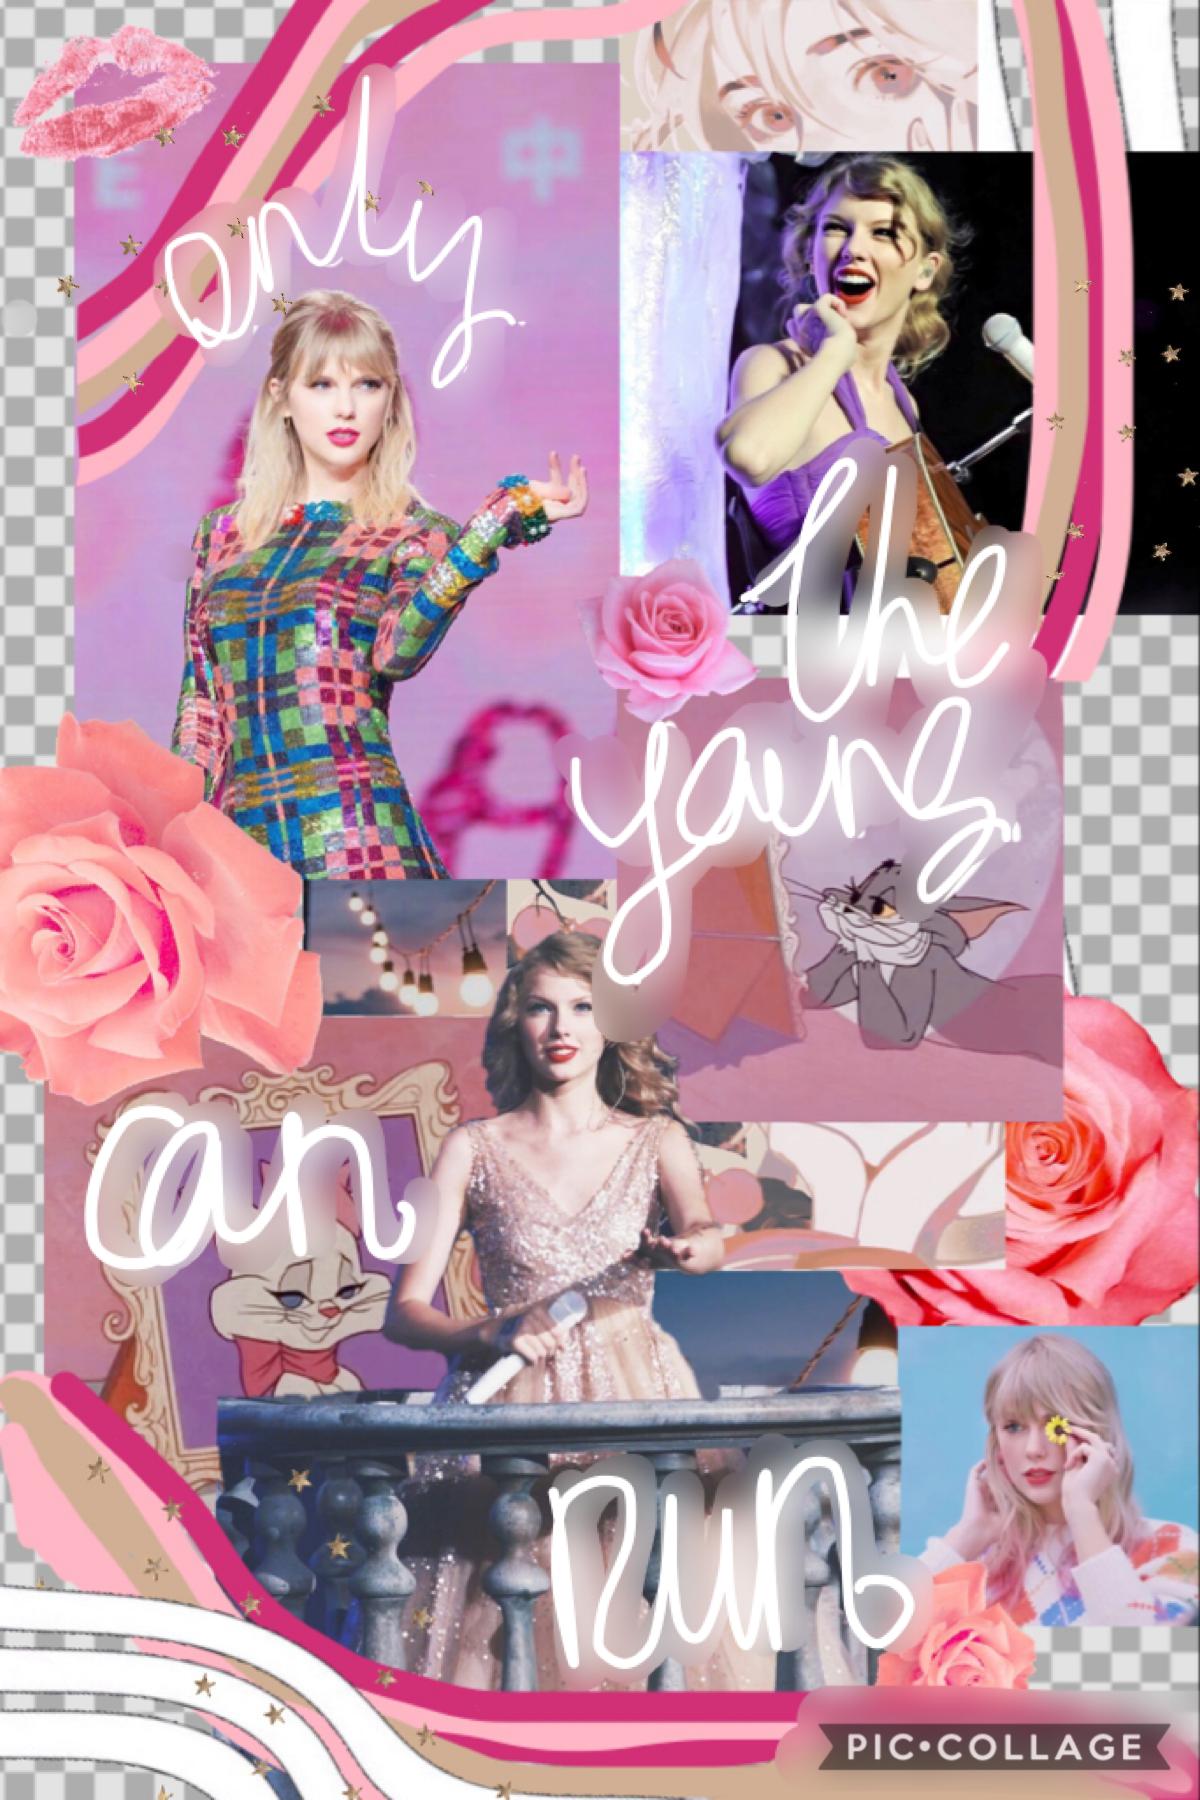 tappity tap 💓

aghhh Taylor 🥺🥰 omg I’ve been planning this collage for so long bc I needed smth about herrr 💗 
《Miss Americana》 waTch it pleaaaase 🤭
and ahhh 💕‘Only The Young’ 💫 I am addicted 😂